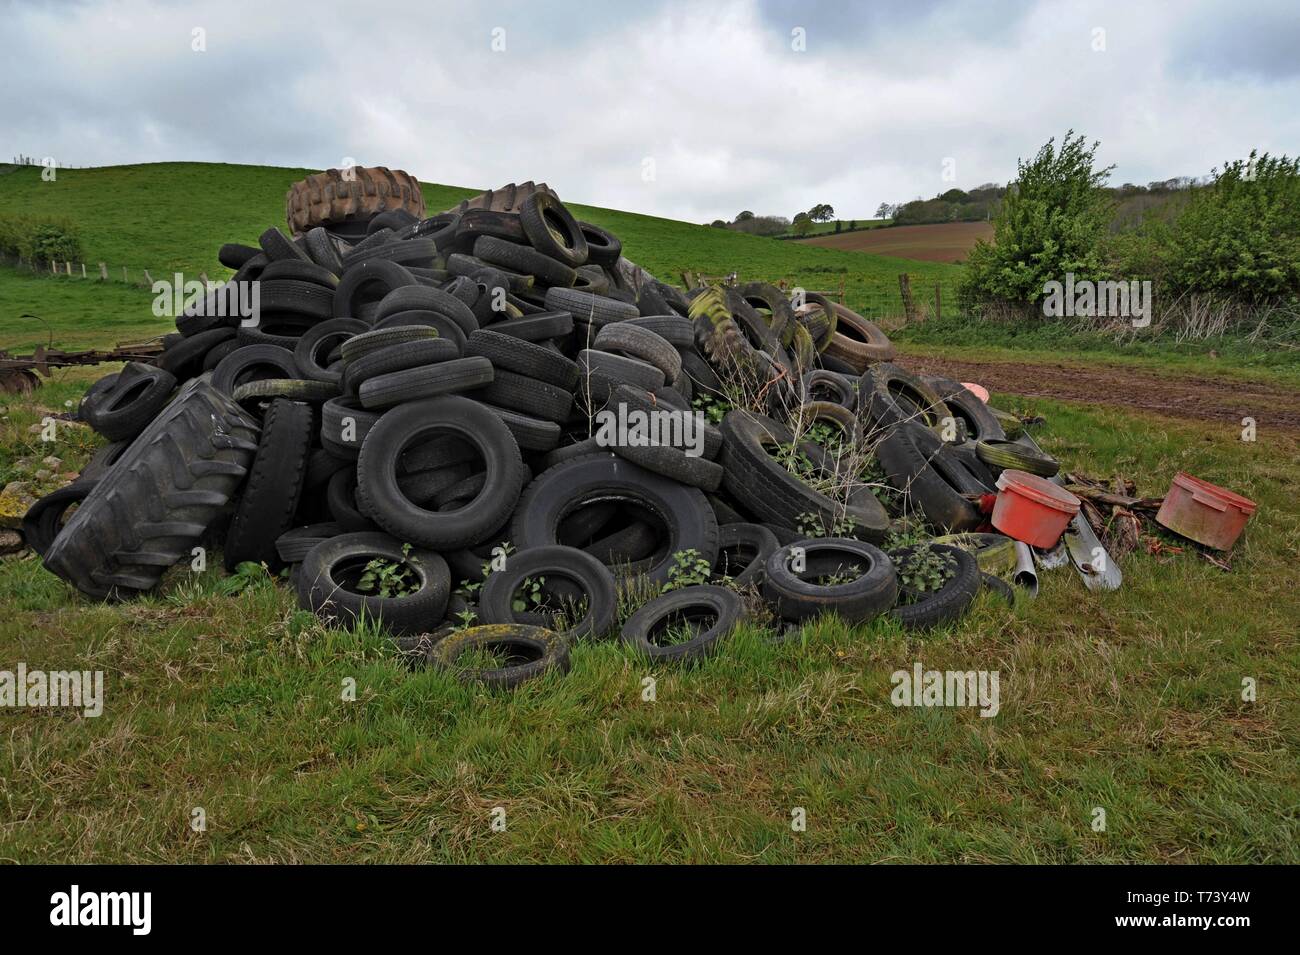 A pile of old worn out tyres on a farm in rural Herefordshire Stock Photo